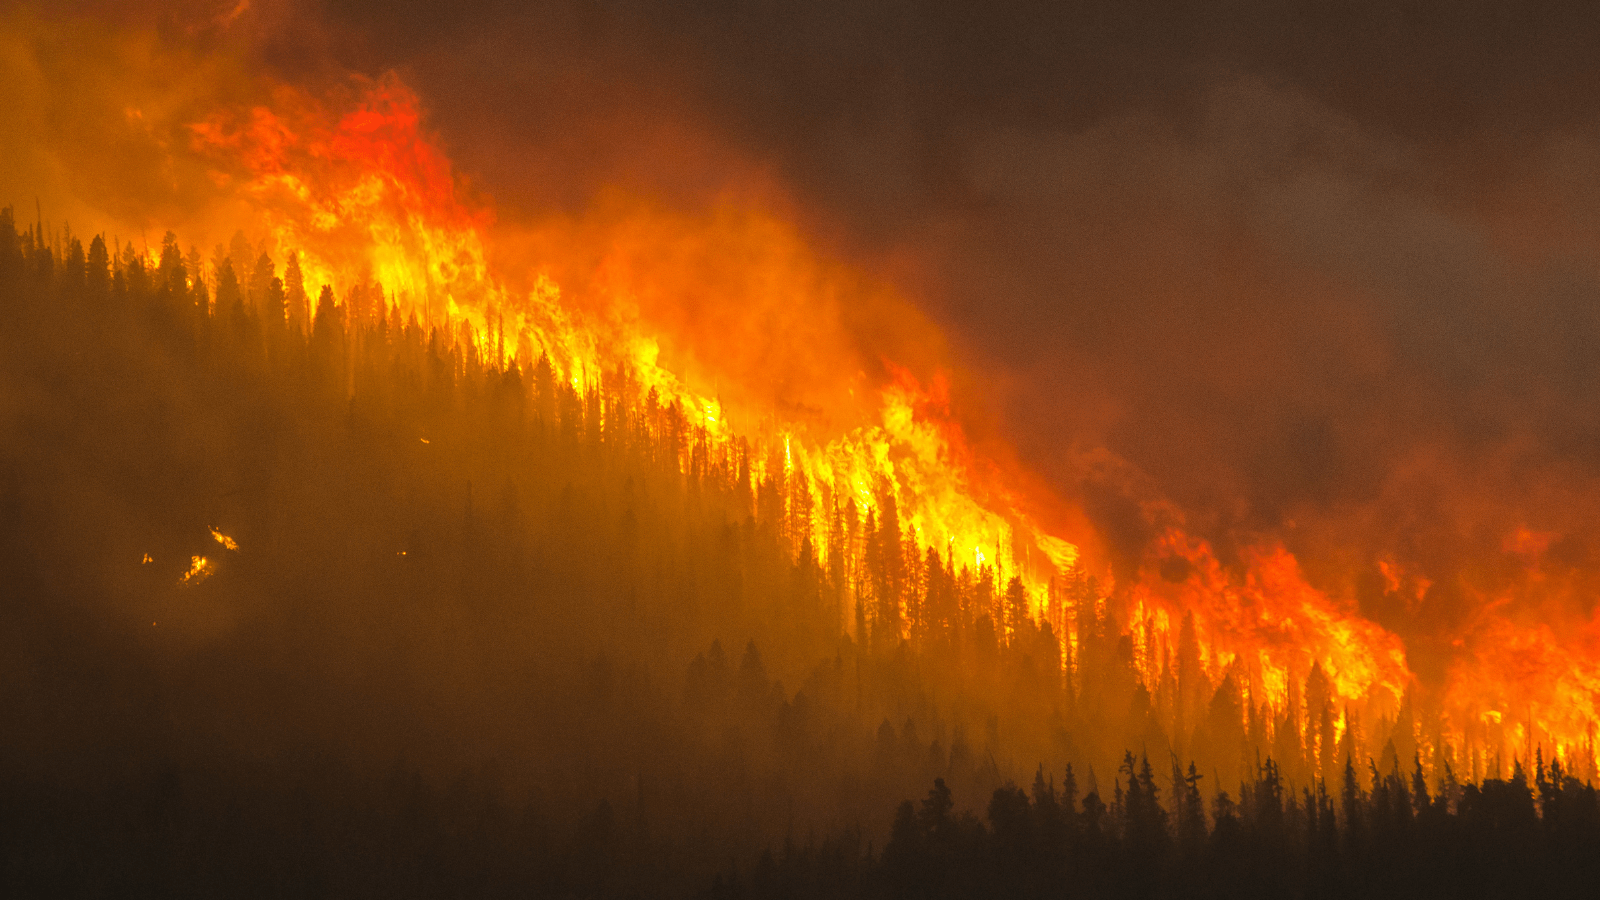 Wildfire burning a forest with dense smoke.